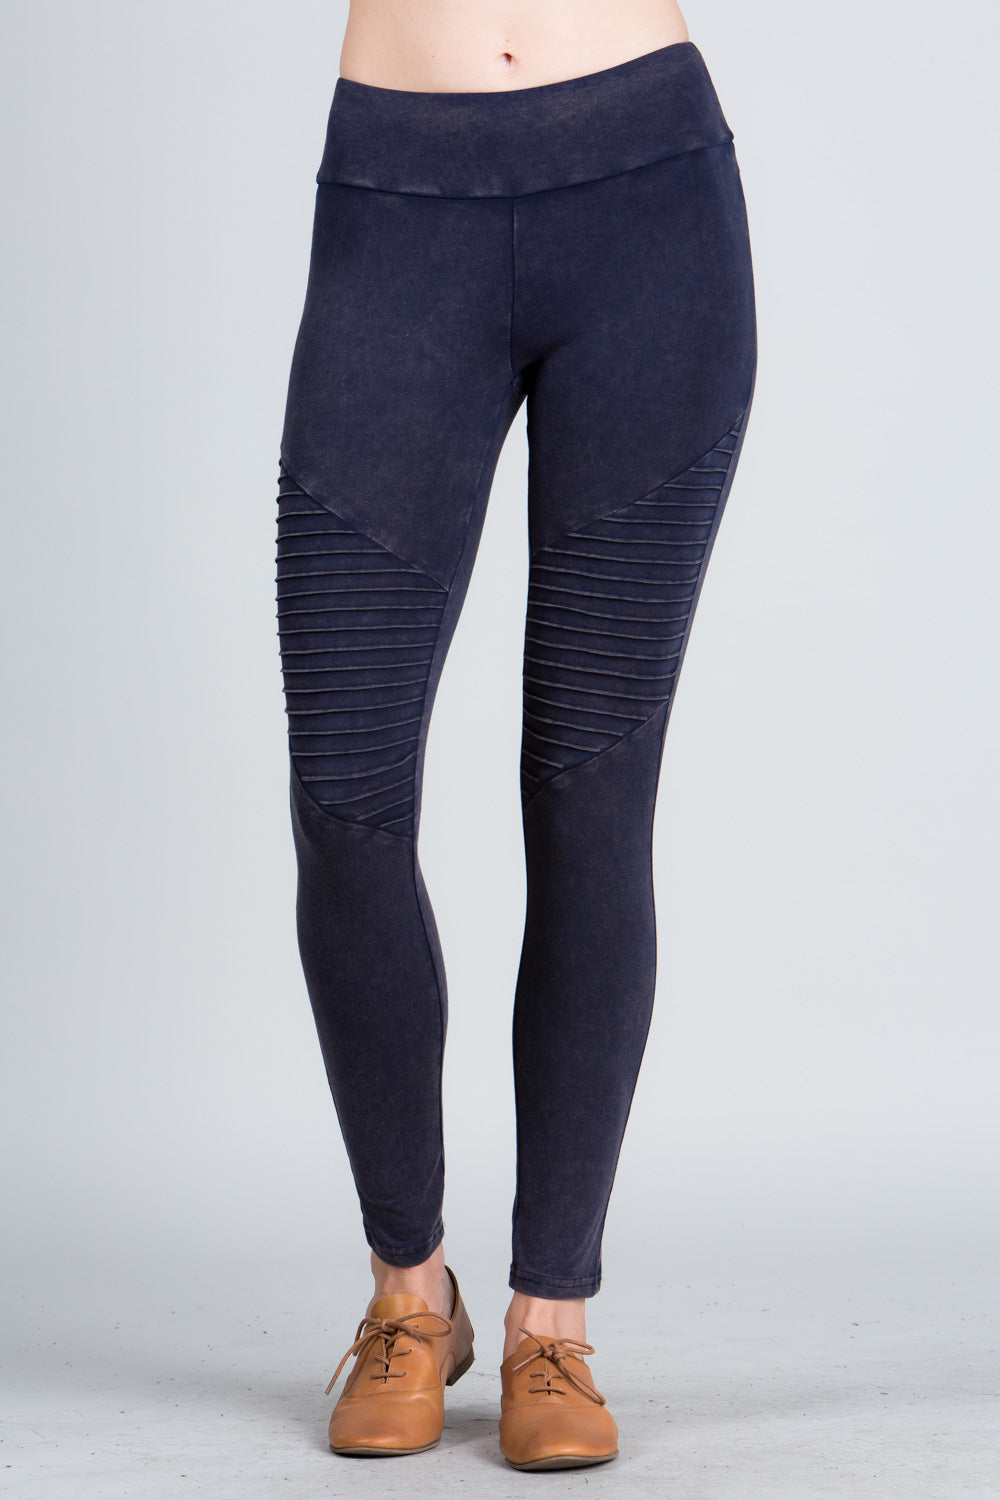 Mineral Washed Moto Leggings